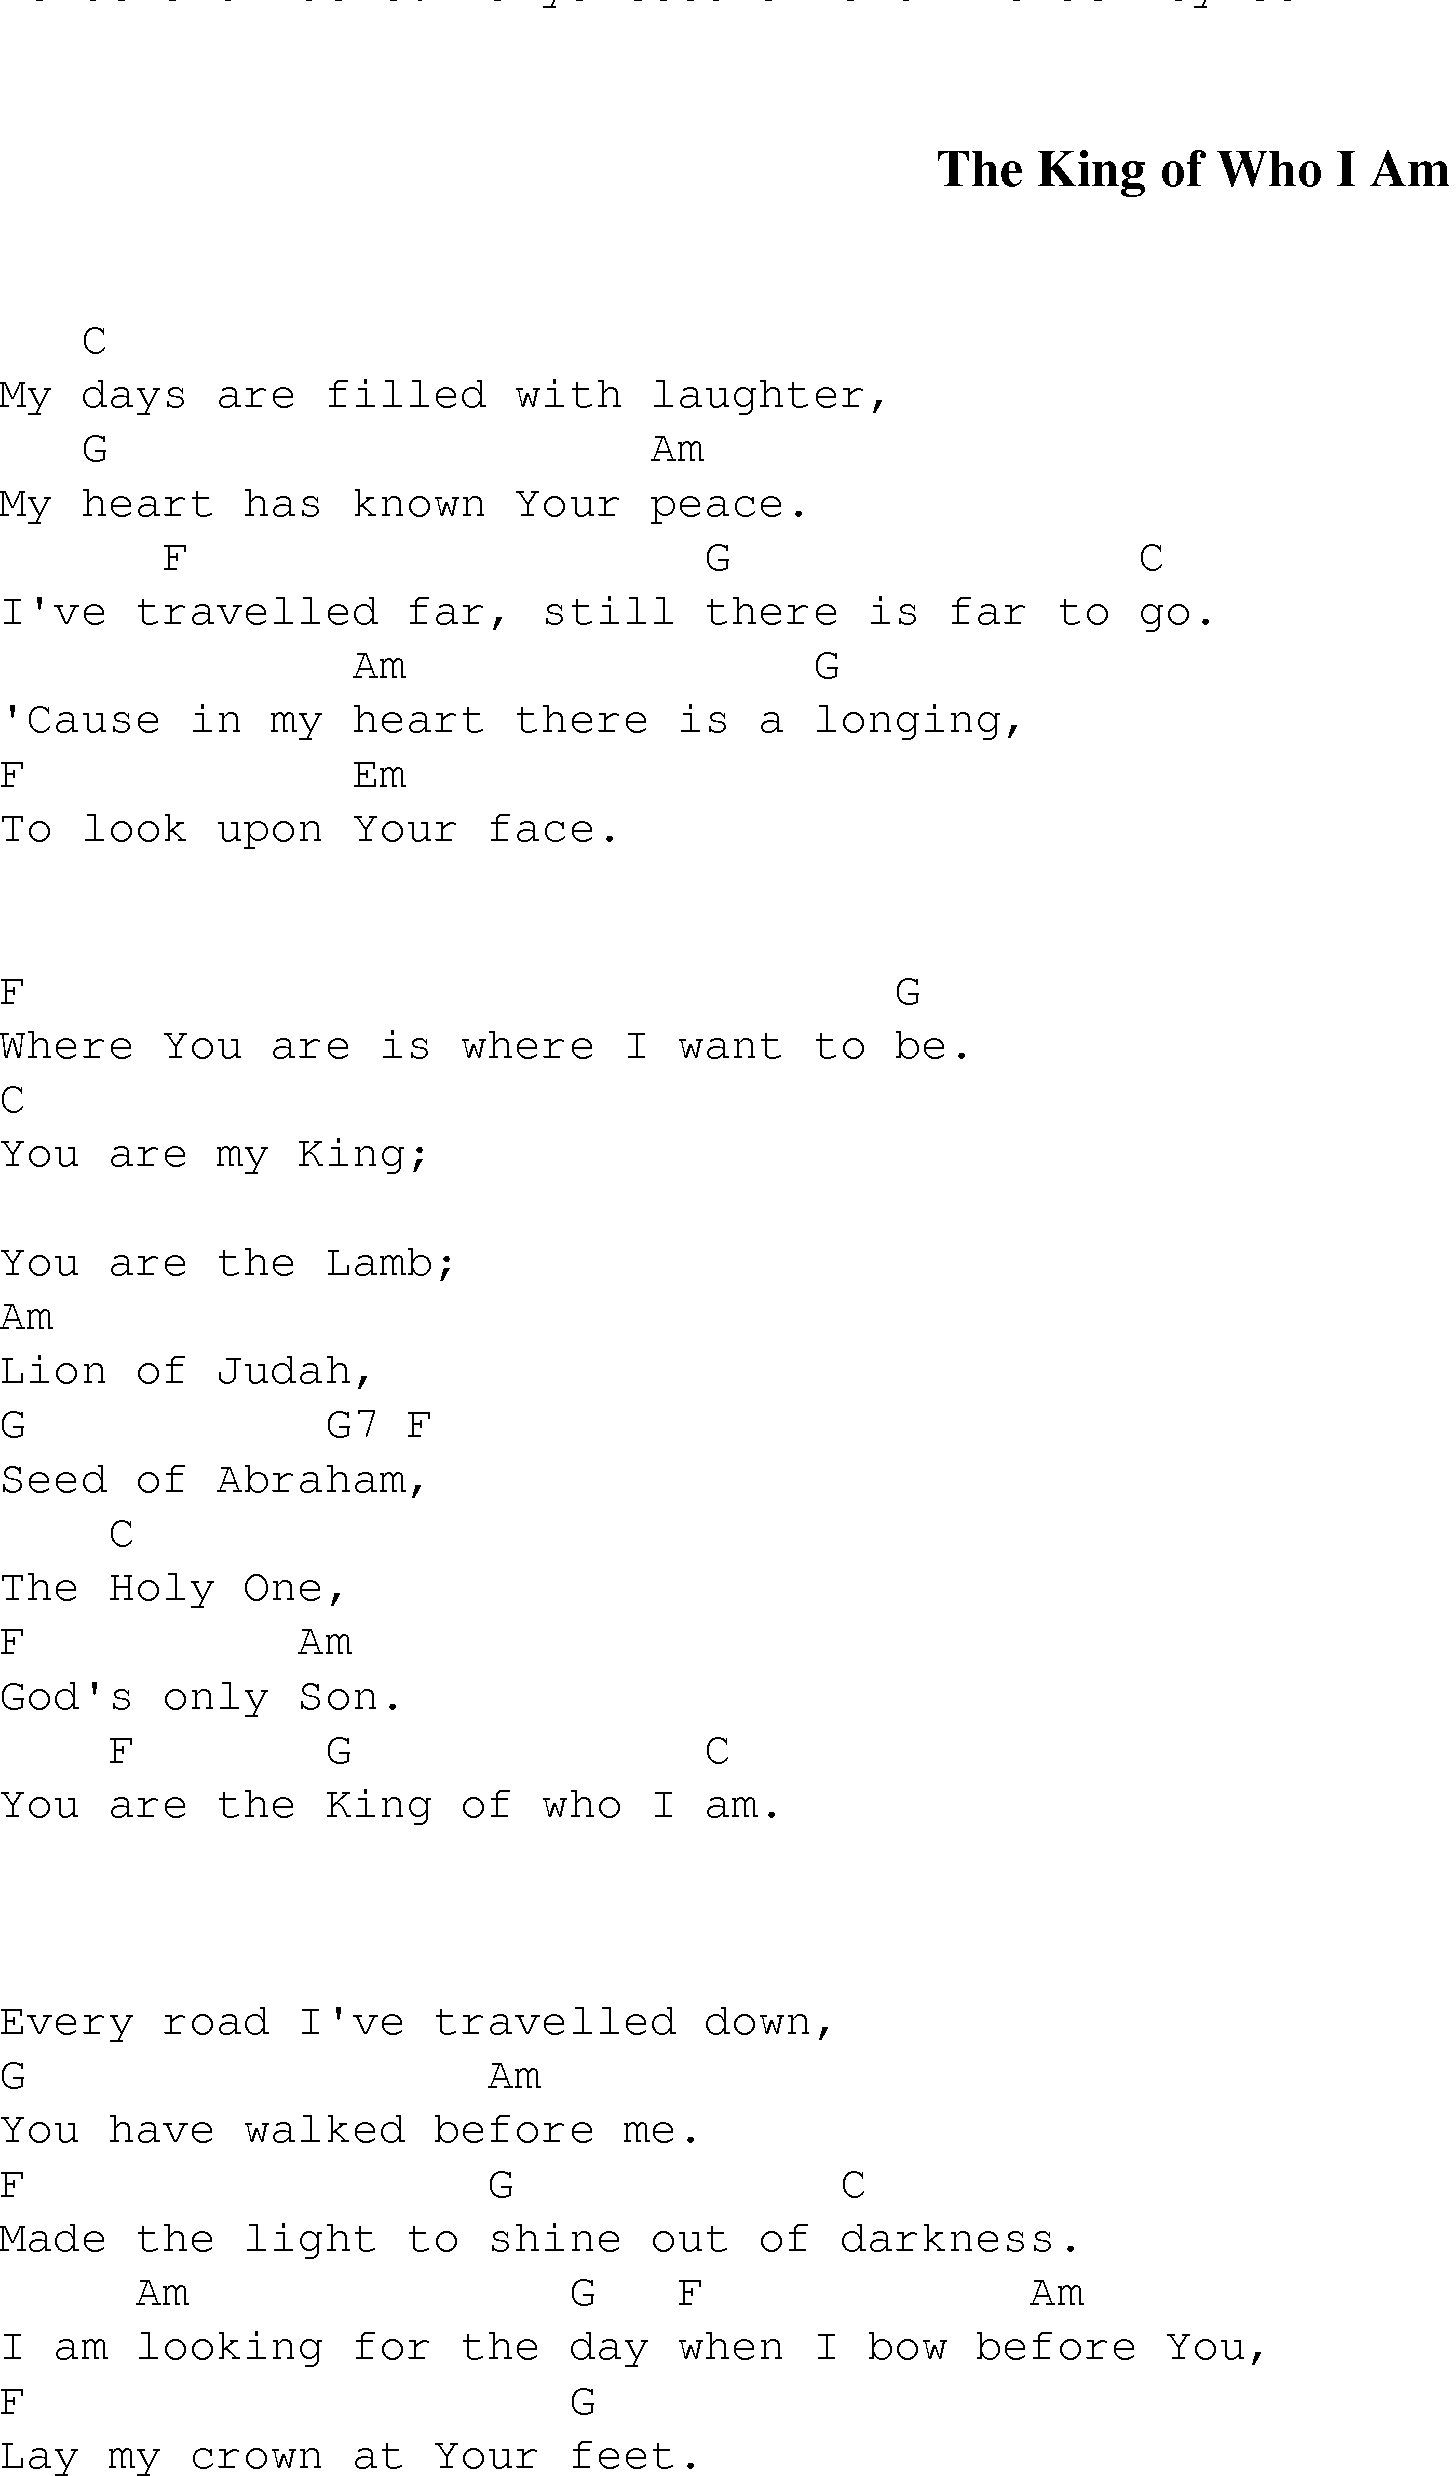 King Of My Heart Chords The King Of Who I Am Christian Gospel Song Lyrics And Chords